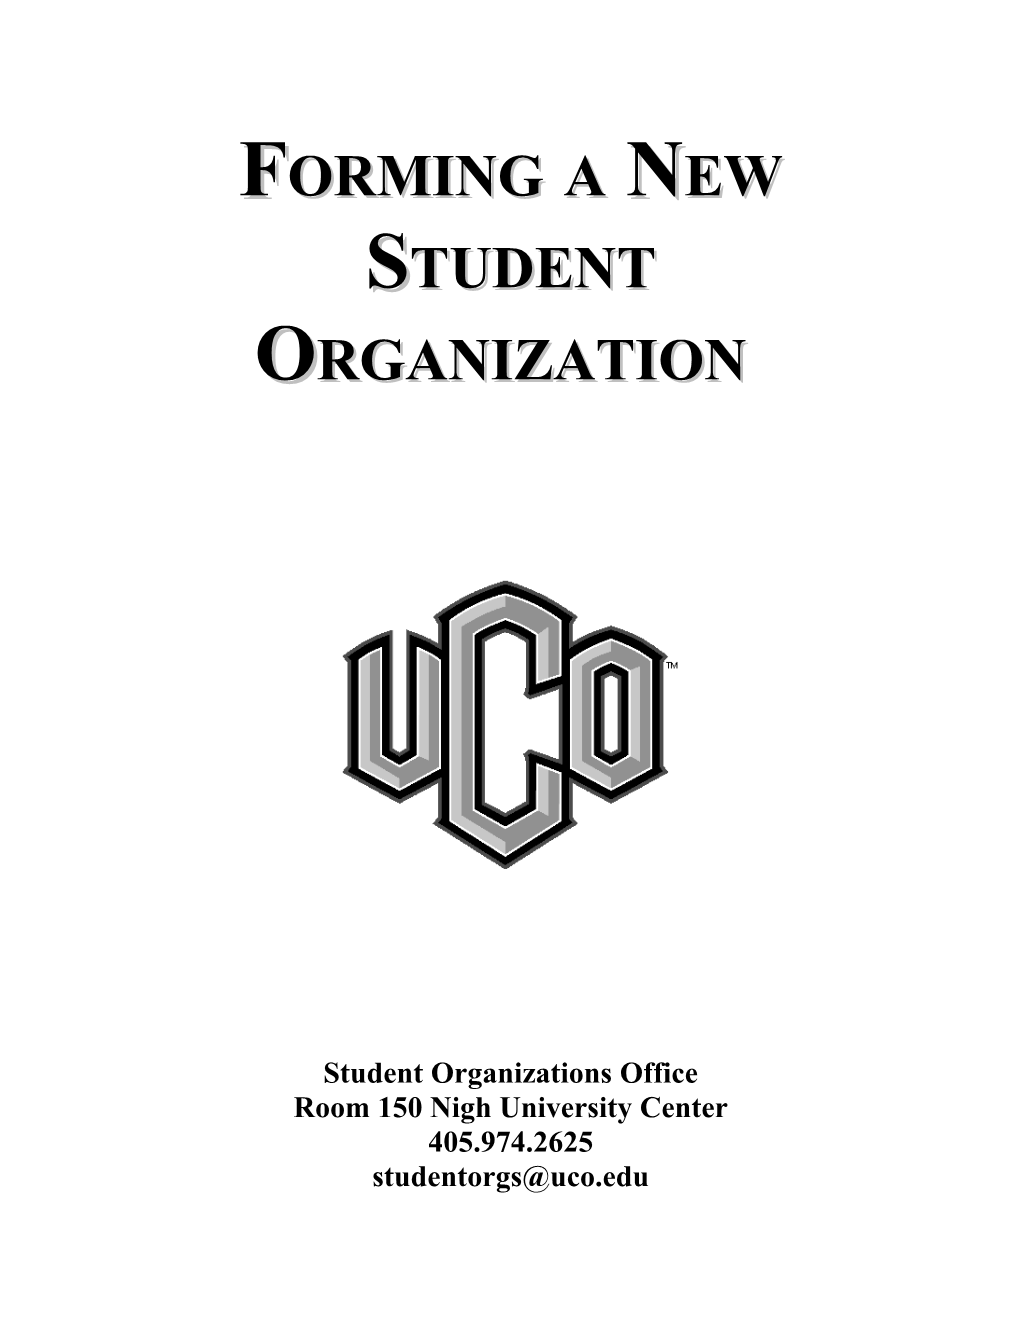 Steps to Forming a New Student Organization